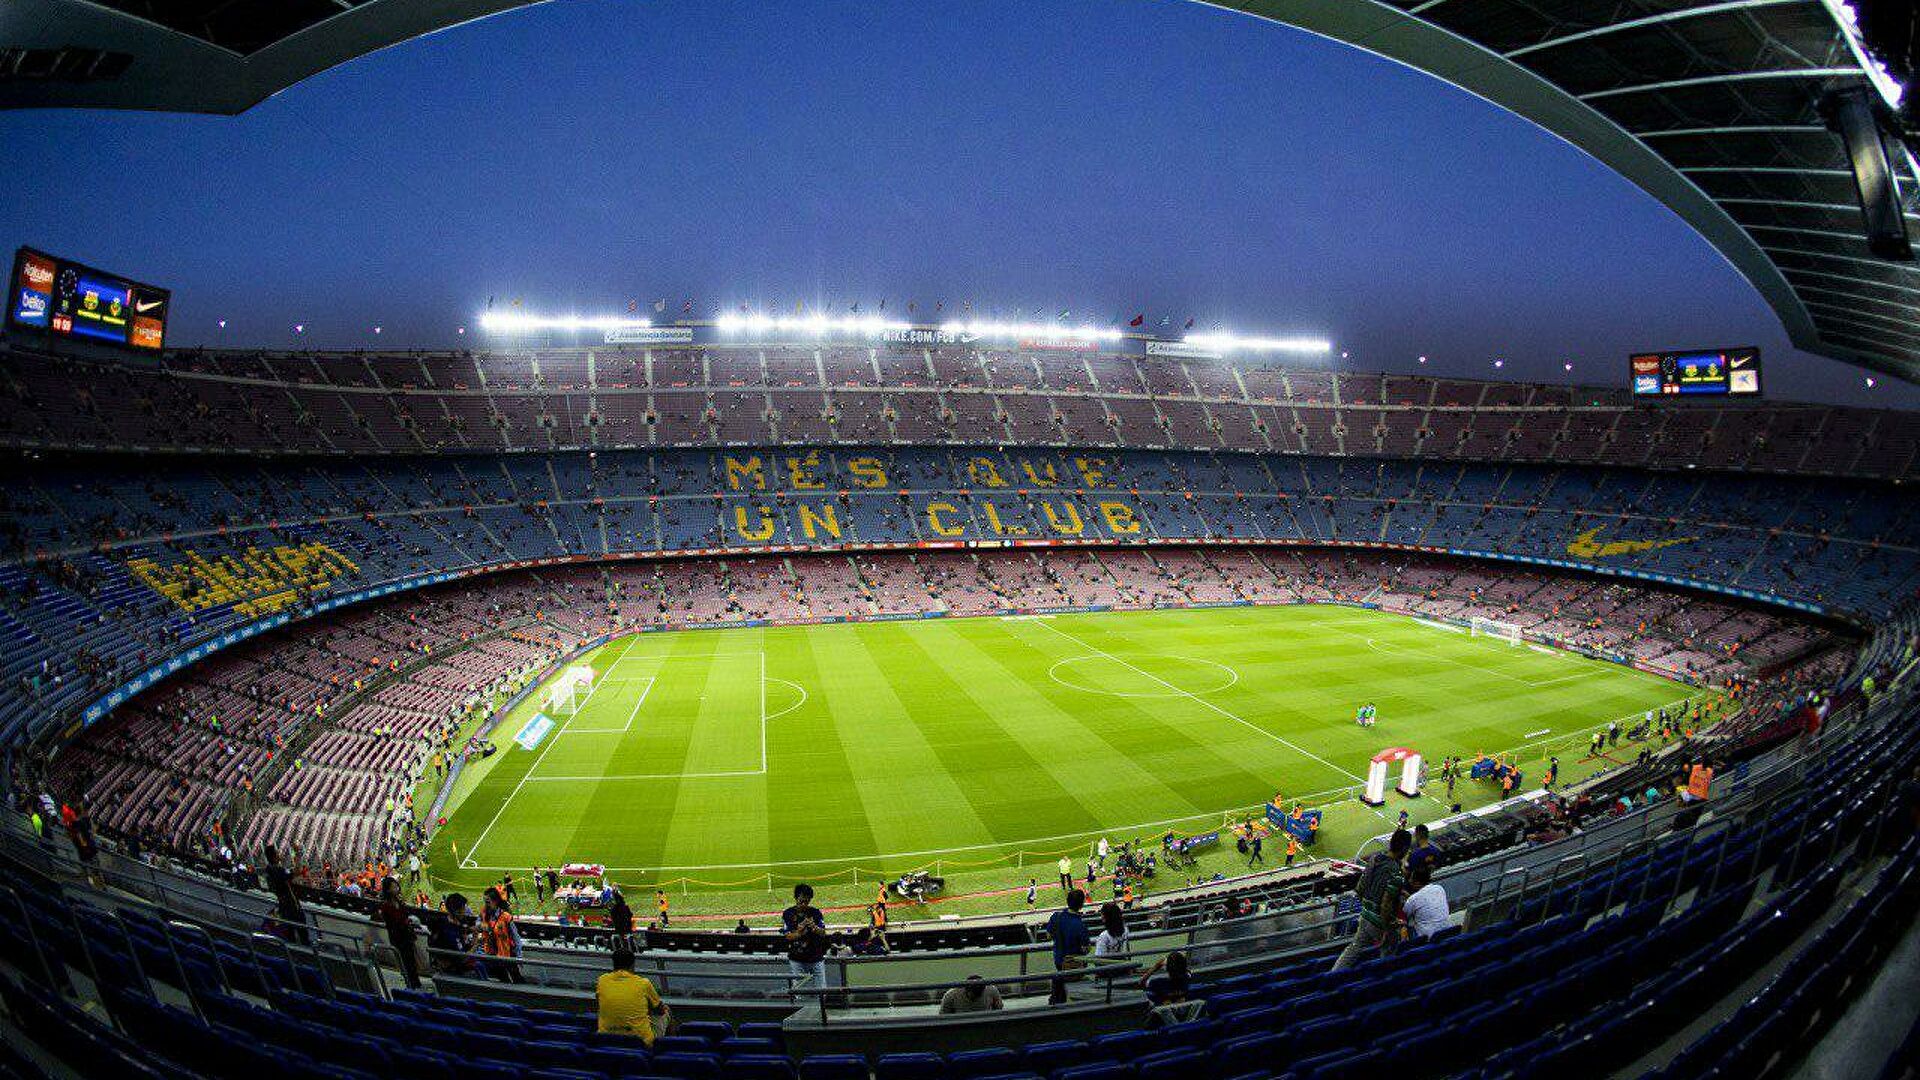 Камп ноу - camp nou - abcdef.wiki